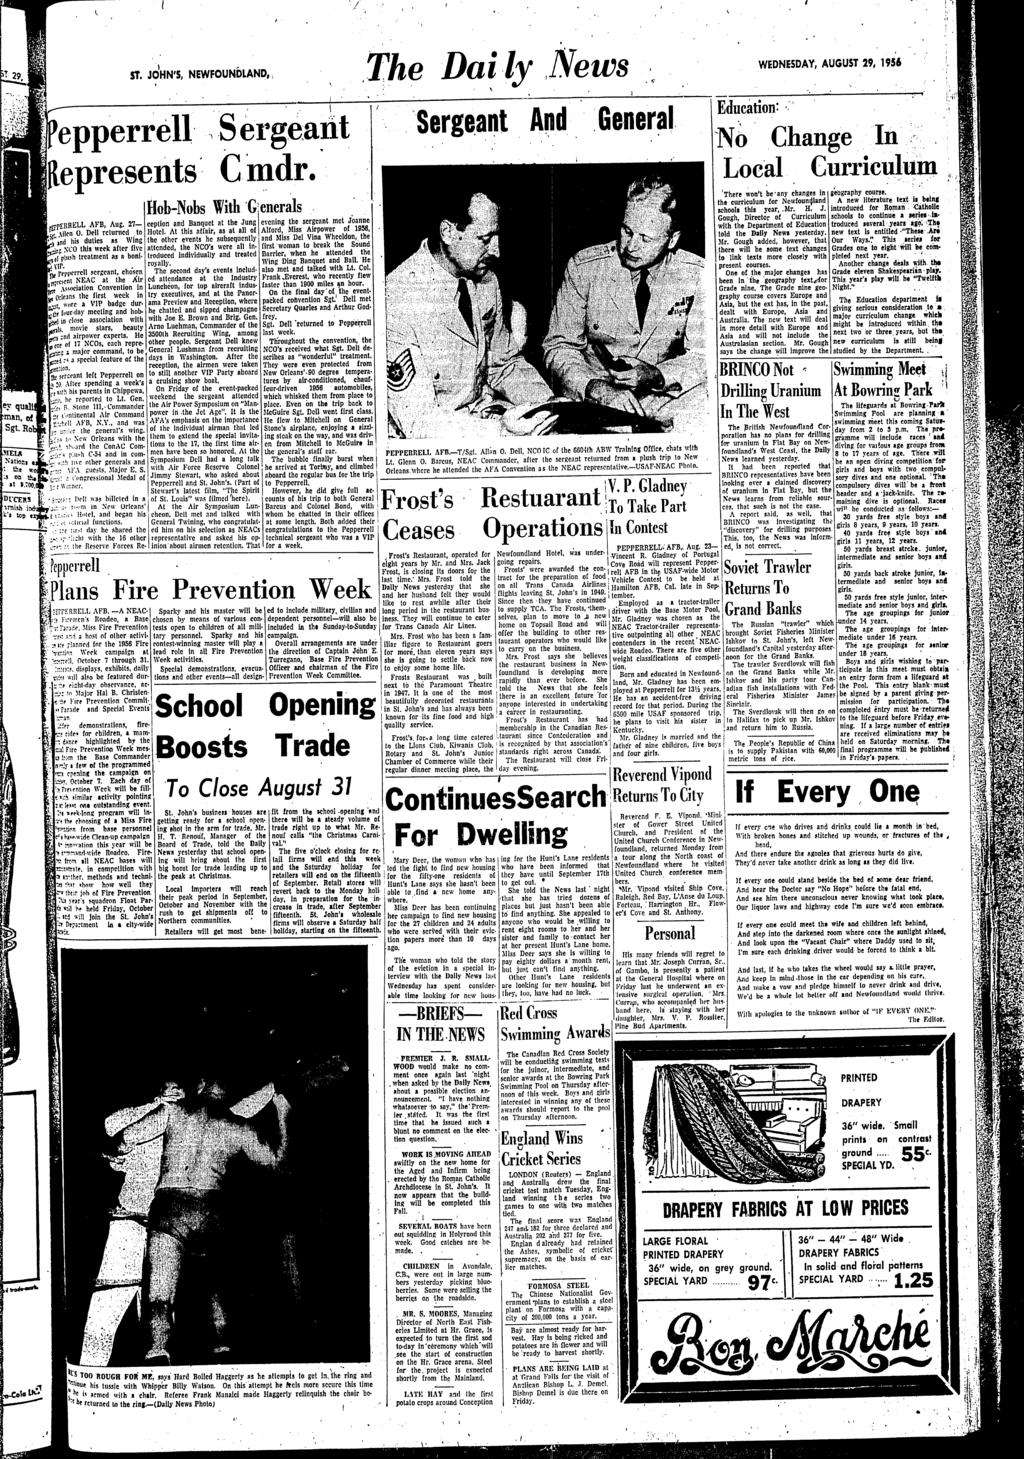 i~ '/ ' '1 ST JOHN'S NEWFOUNDLAND The Daily News fj' WEDNESDAY' AUGUST 29 1956 epperrell epresents' 1'rEltRELL AFB Aug 27- r len O Dell rcturned to Jnd his duties as Wing ~CO this week after c